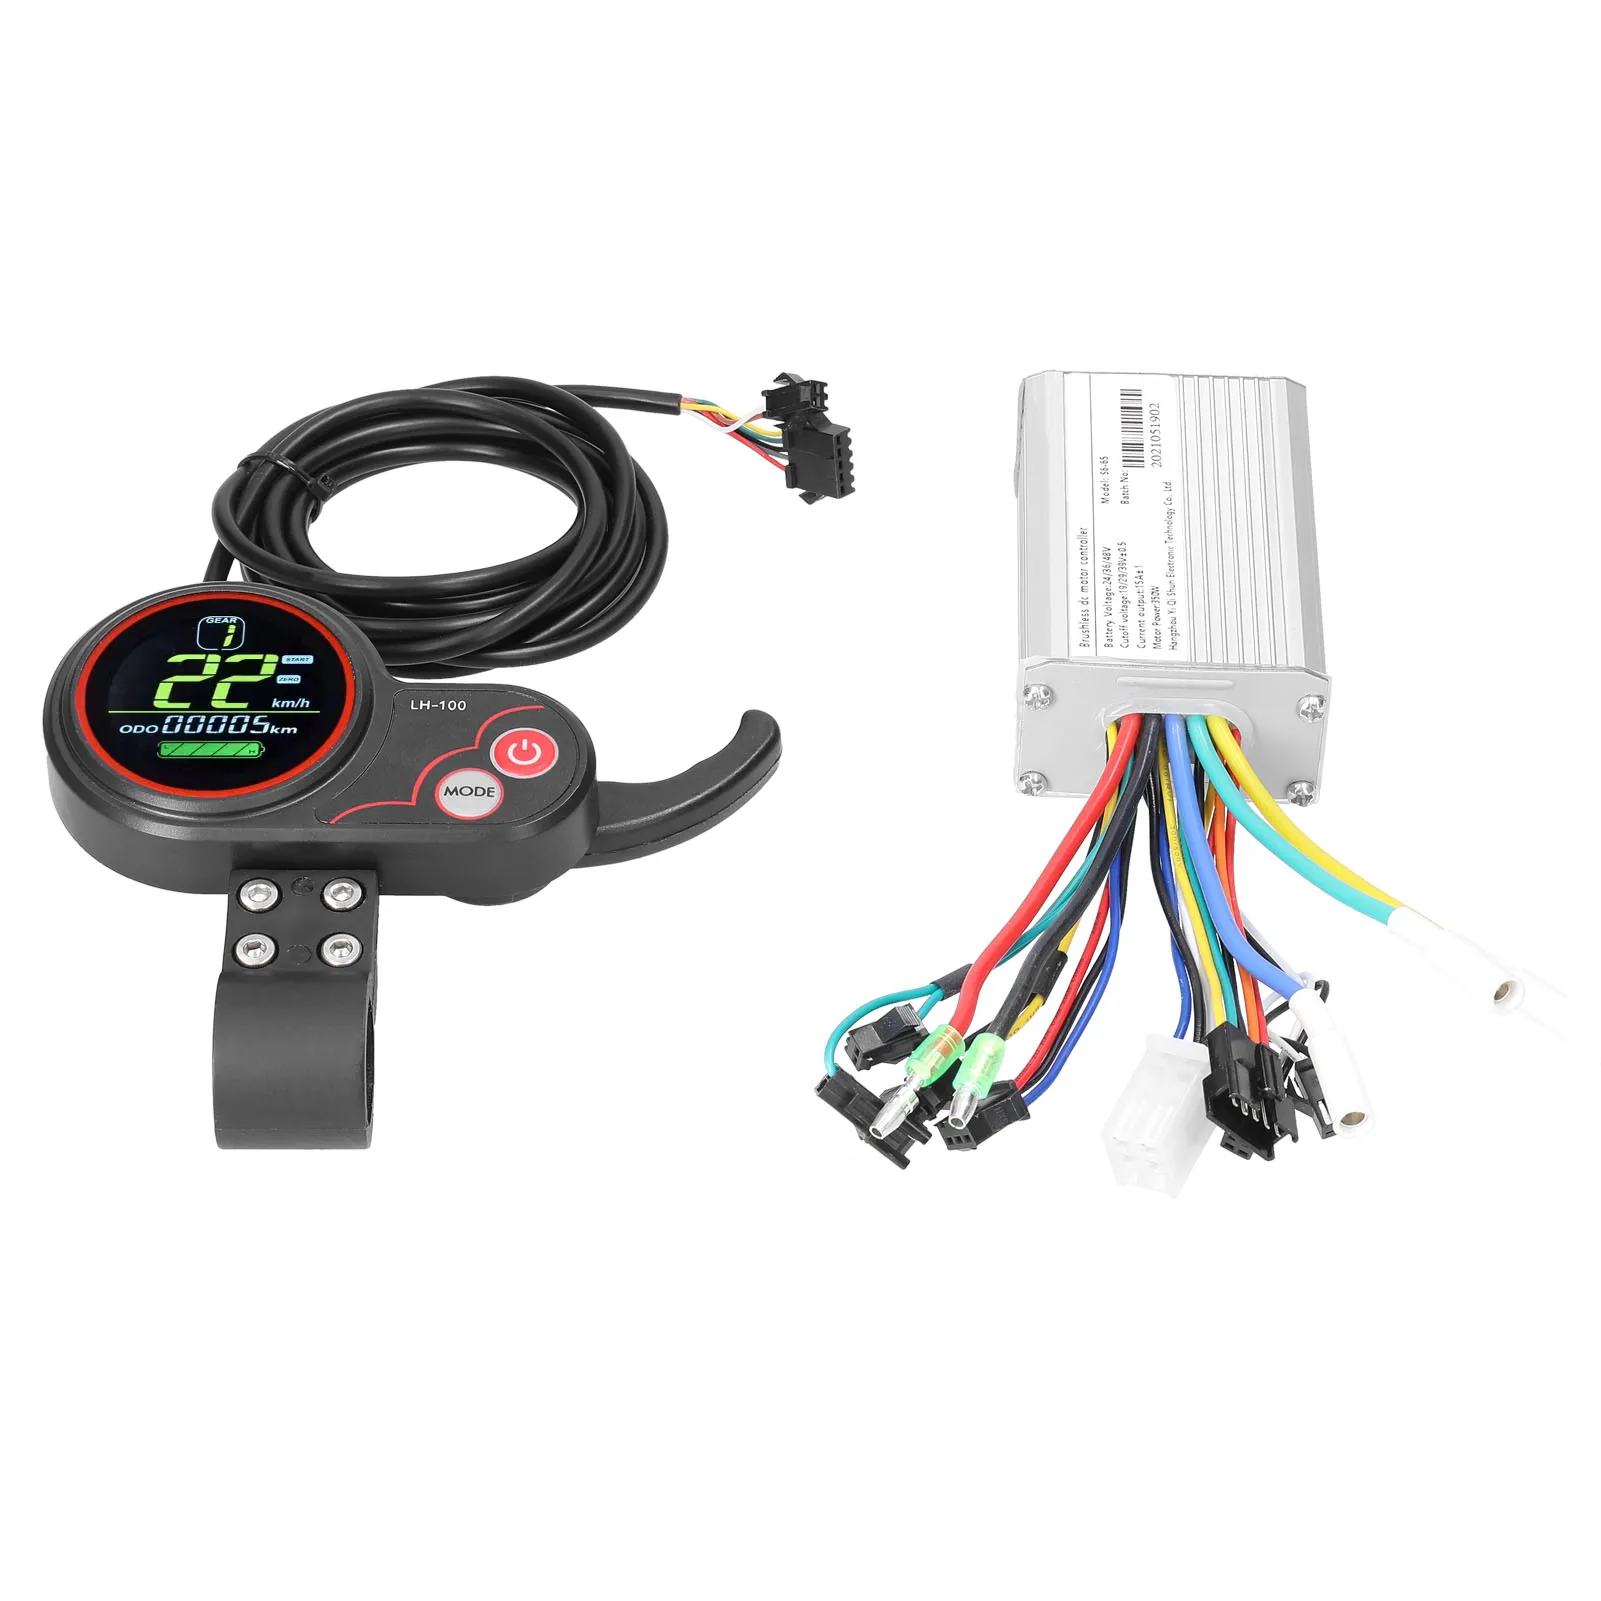 Motor Brushless Controller 36/48V 350W Electric Brushless DC Motor Controller with LCD Display Panel for Electric Bike Bicycle Scooter 